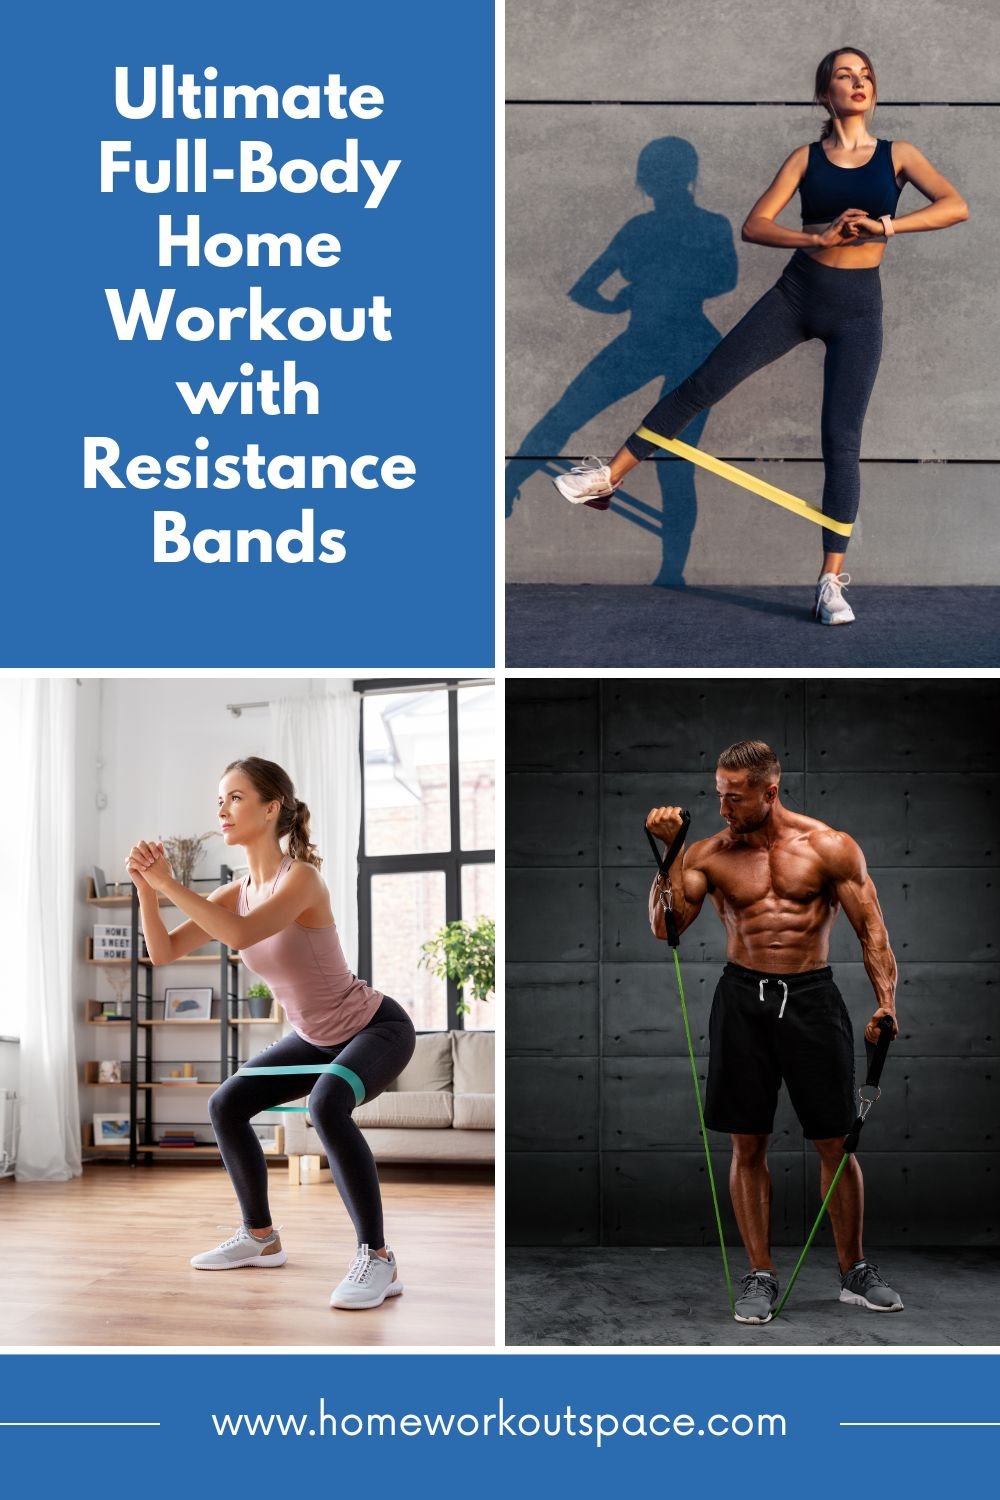 Full-Body Home Workout with Resistance Bands